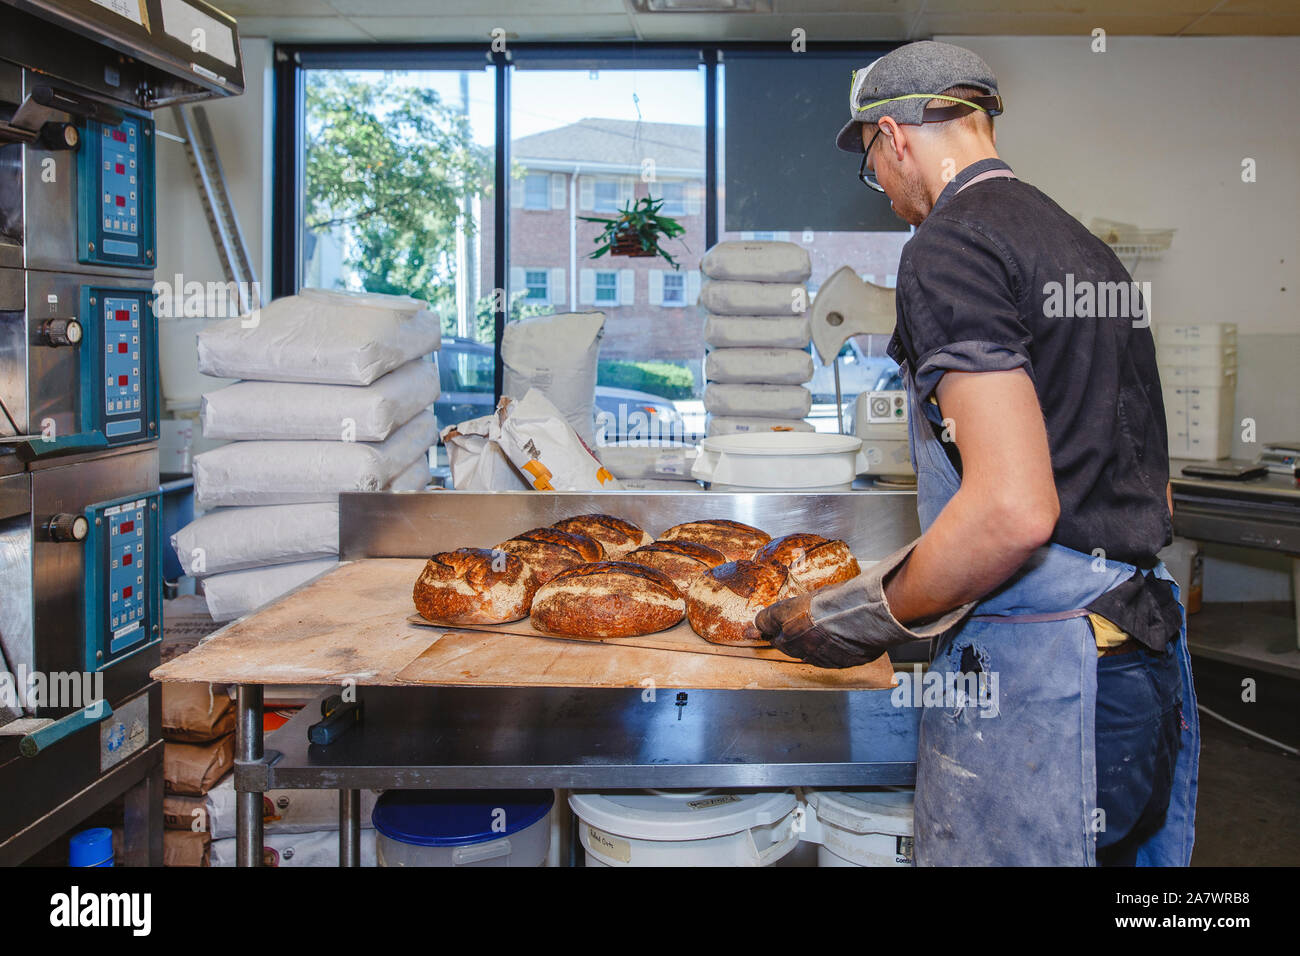 A professional baker sets tray of breads on counter in retail kitchen Stock Photo